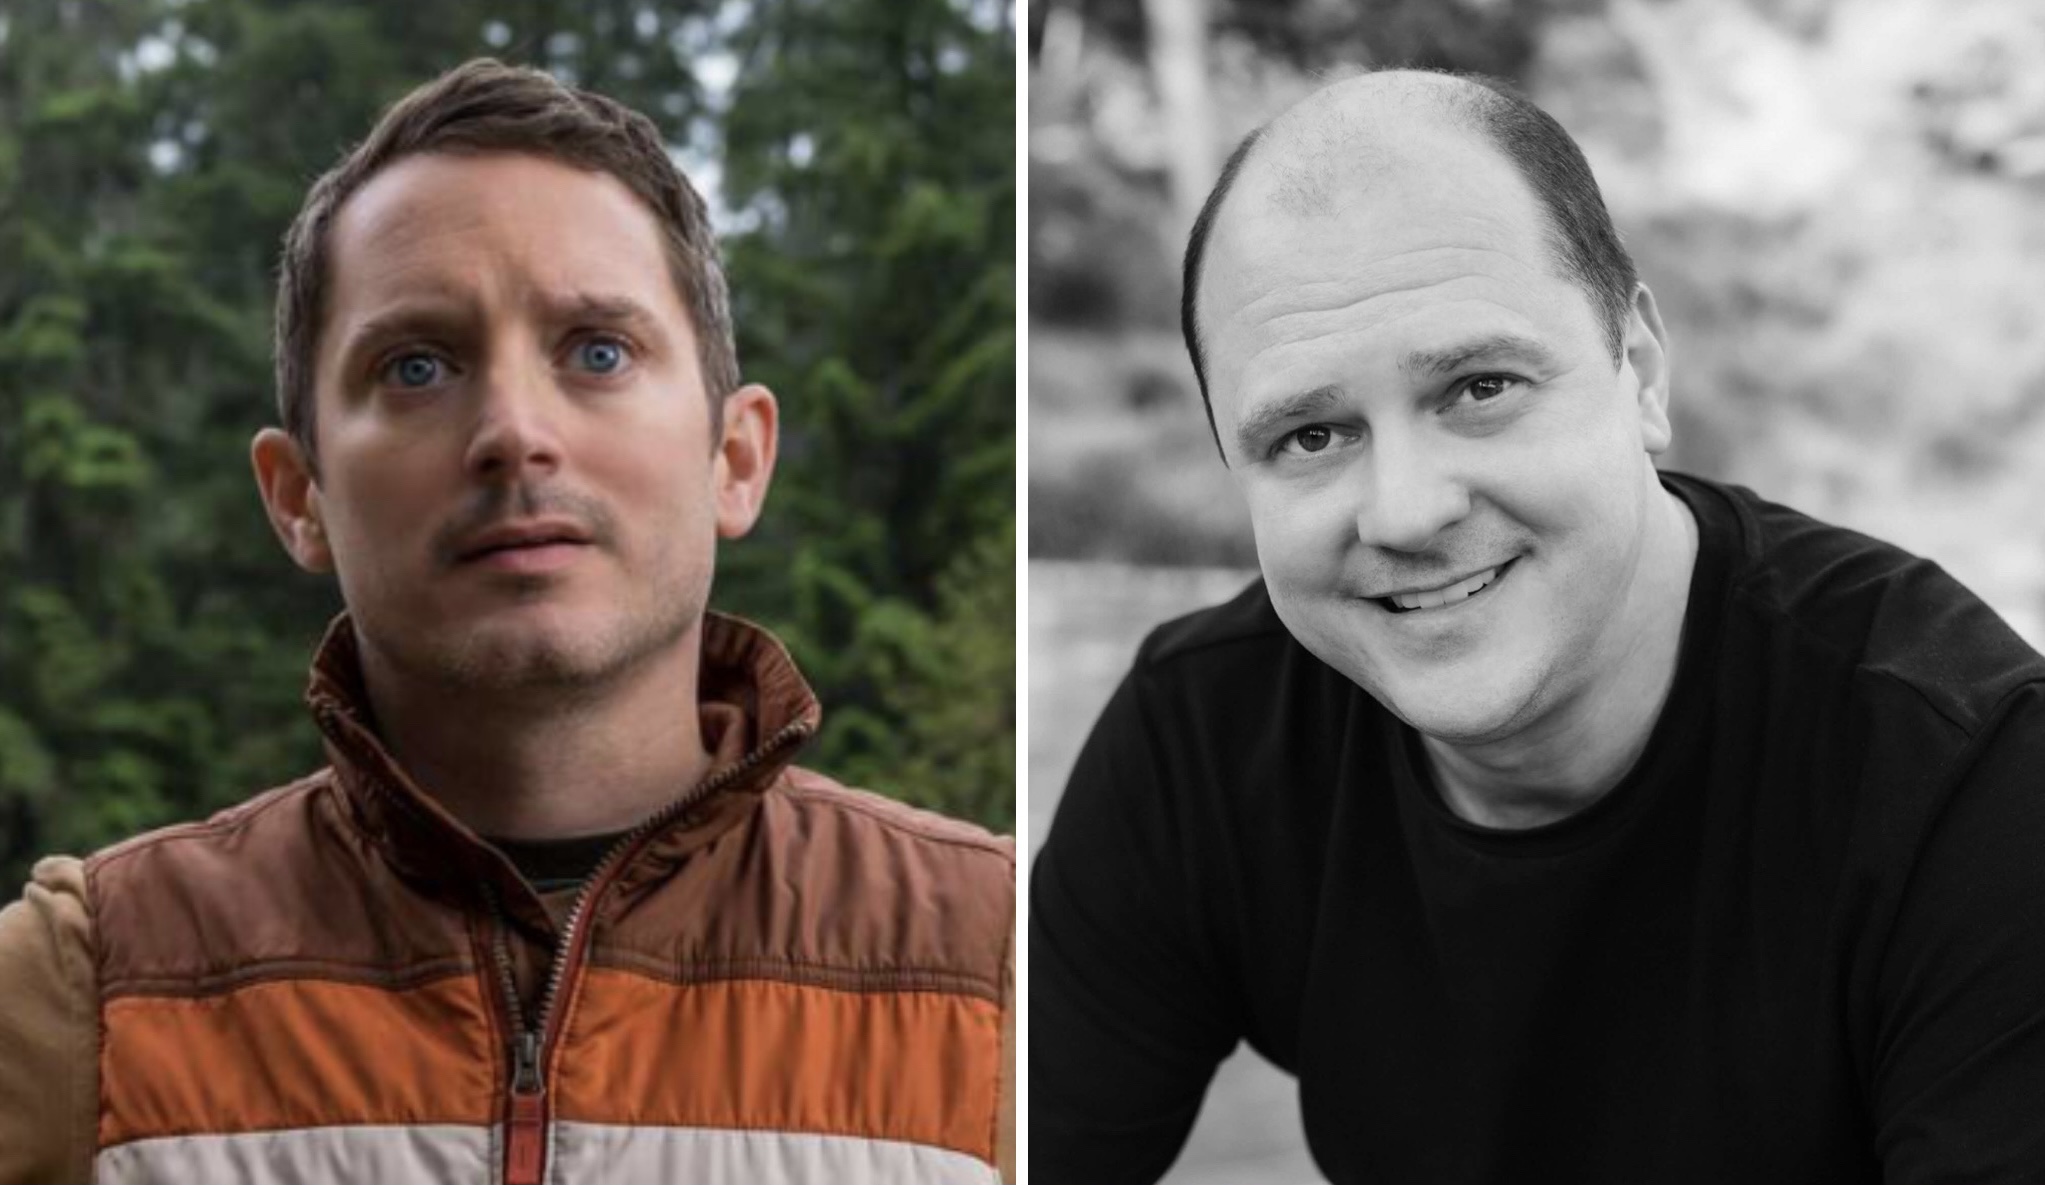 Elijah Wood and Mike Flanagan are coming to Montreal for the Fantasia Film Festival